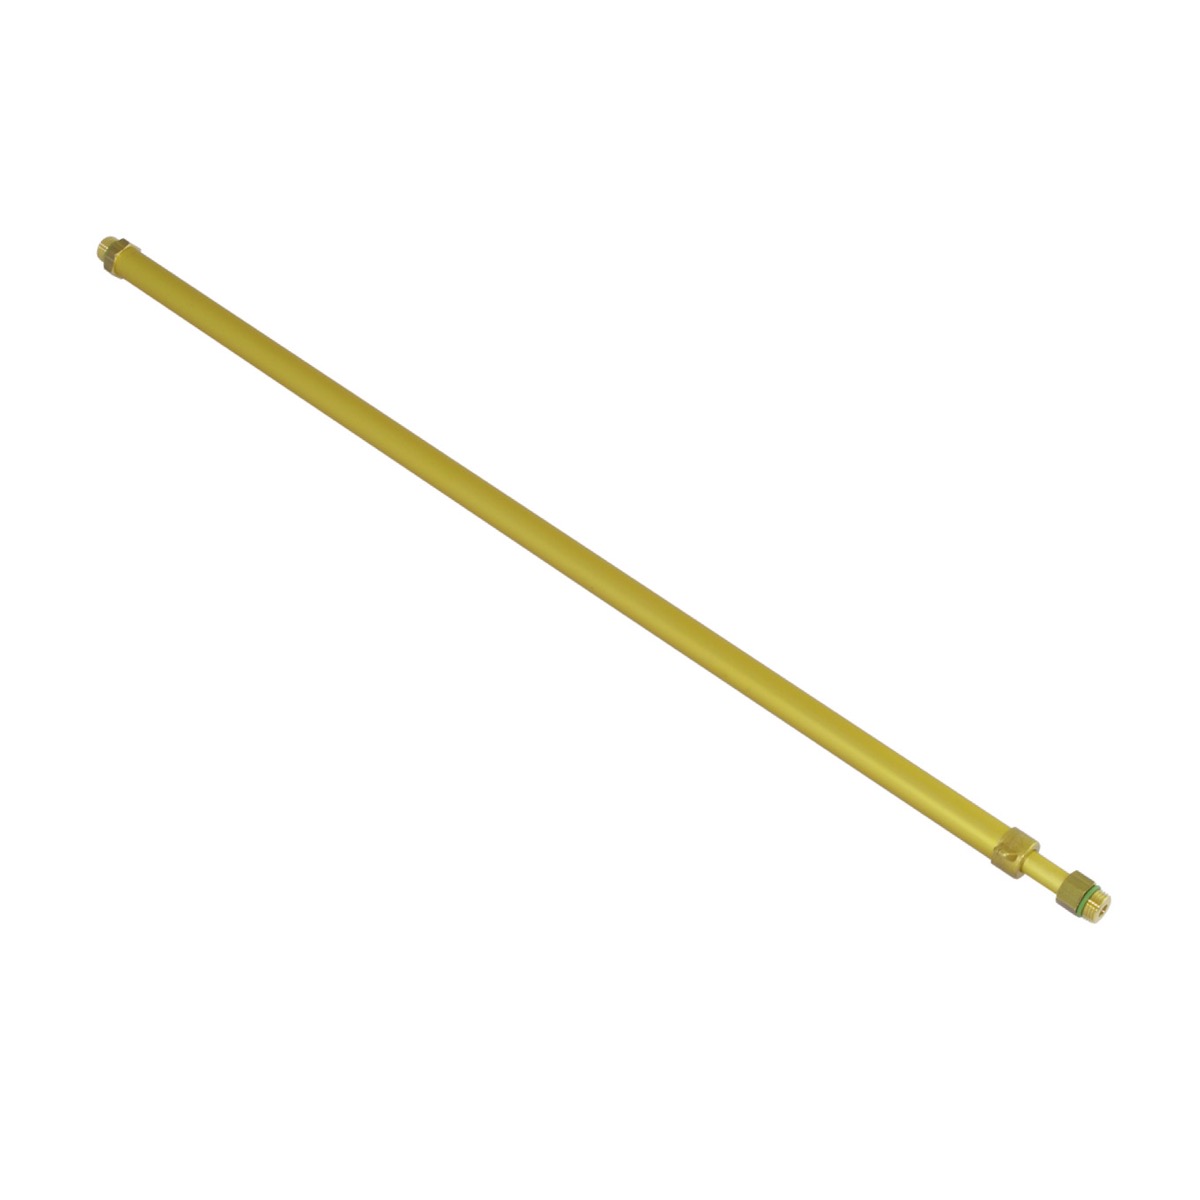 This telescopic aluminium tube extends from when detracted is 1 meter long and can be extended to 2 meters. This anodised Brass tube is suitable for use with the Birchmeier A50 AC1 (CAS with battery pack. Available from Speedcrete, United Kingdom. 